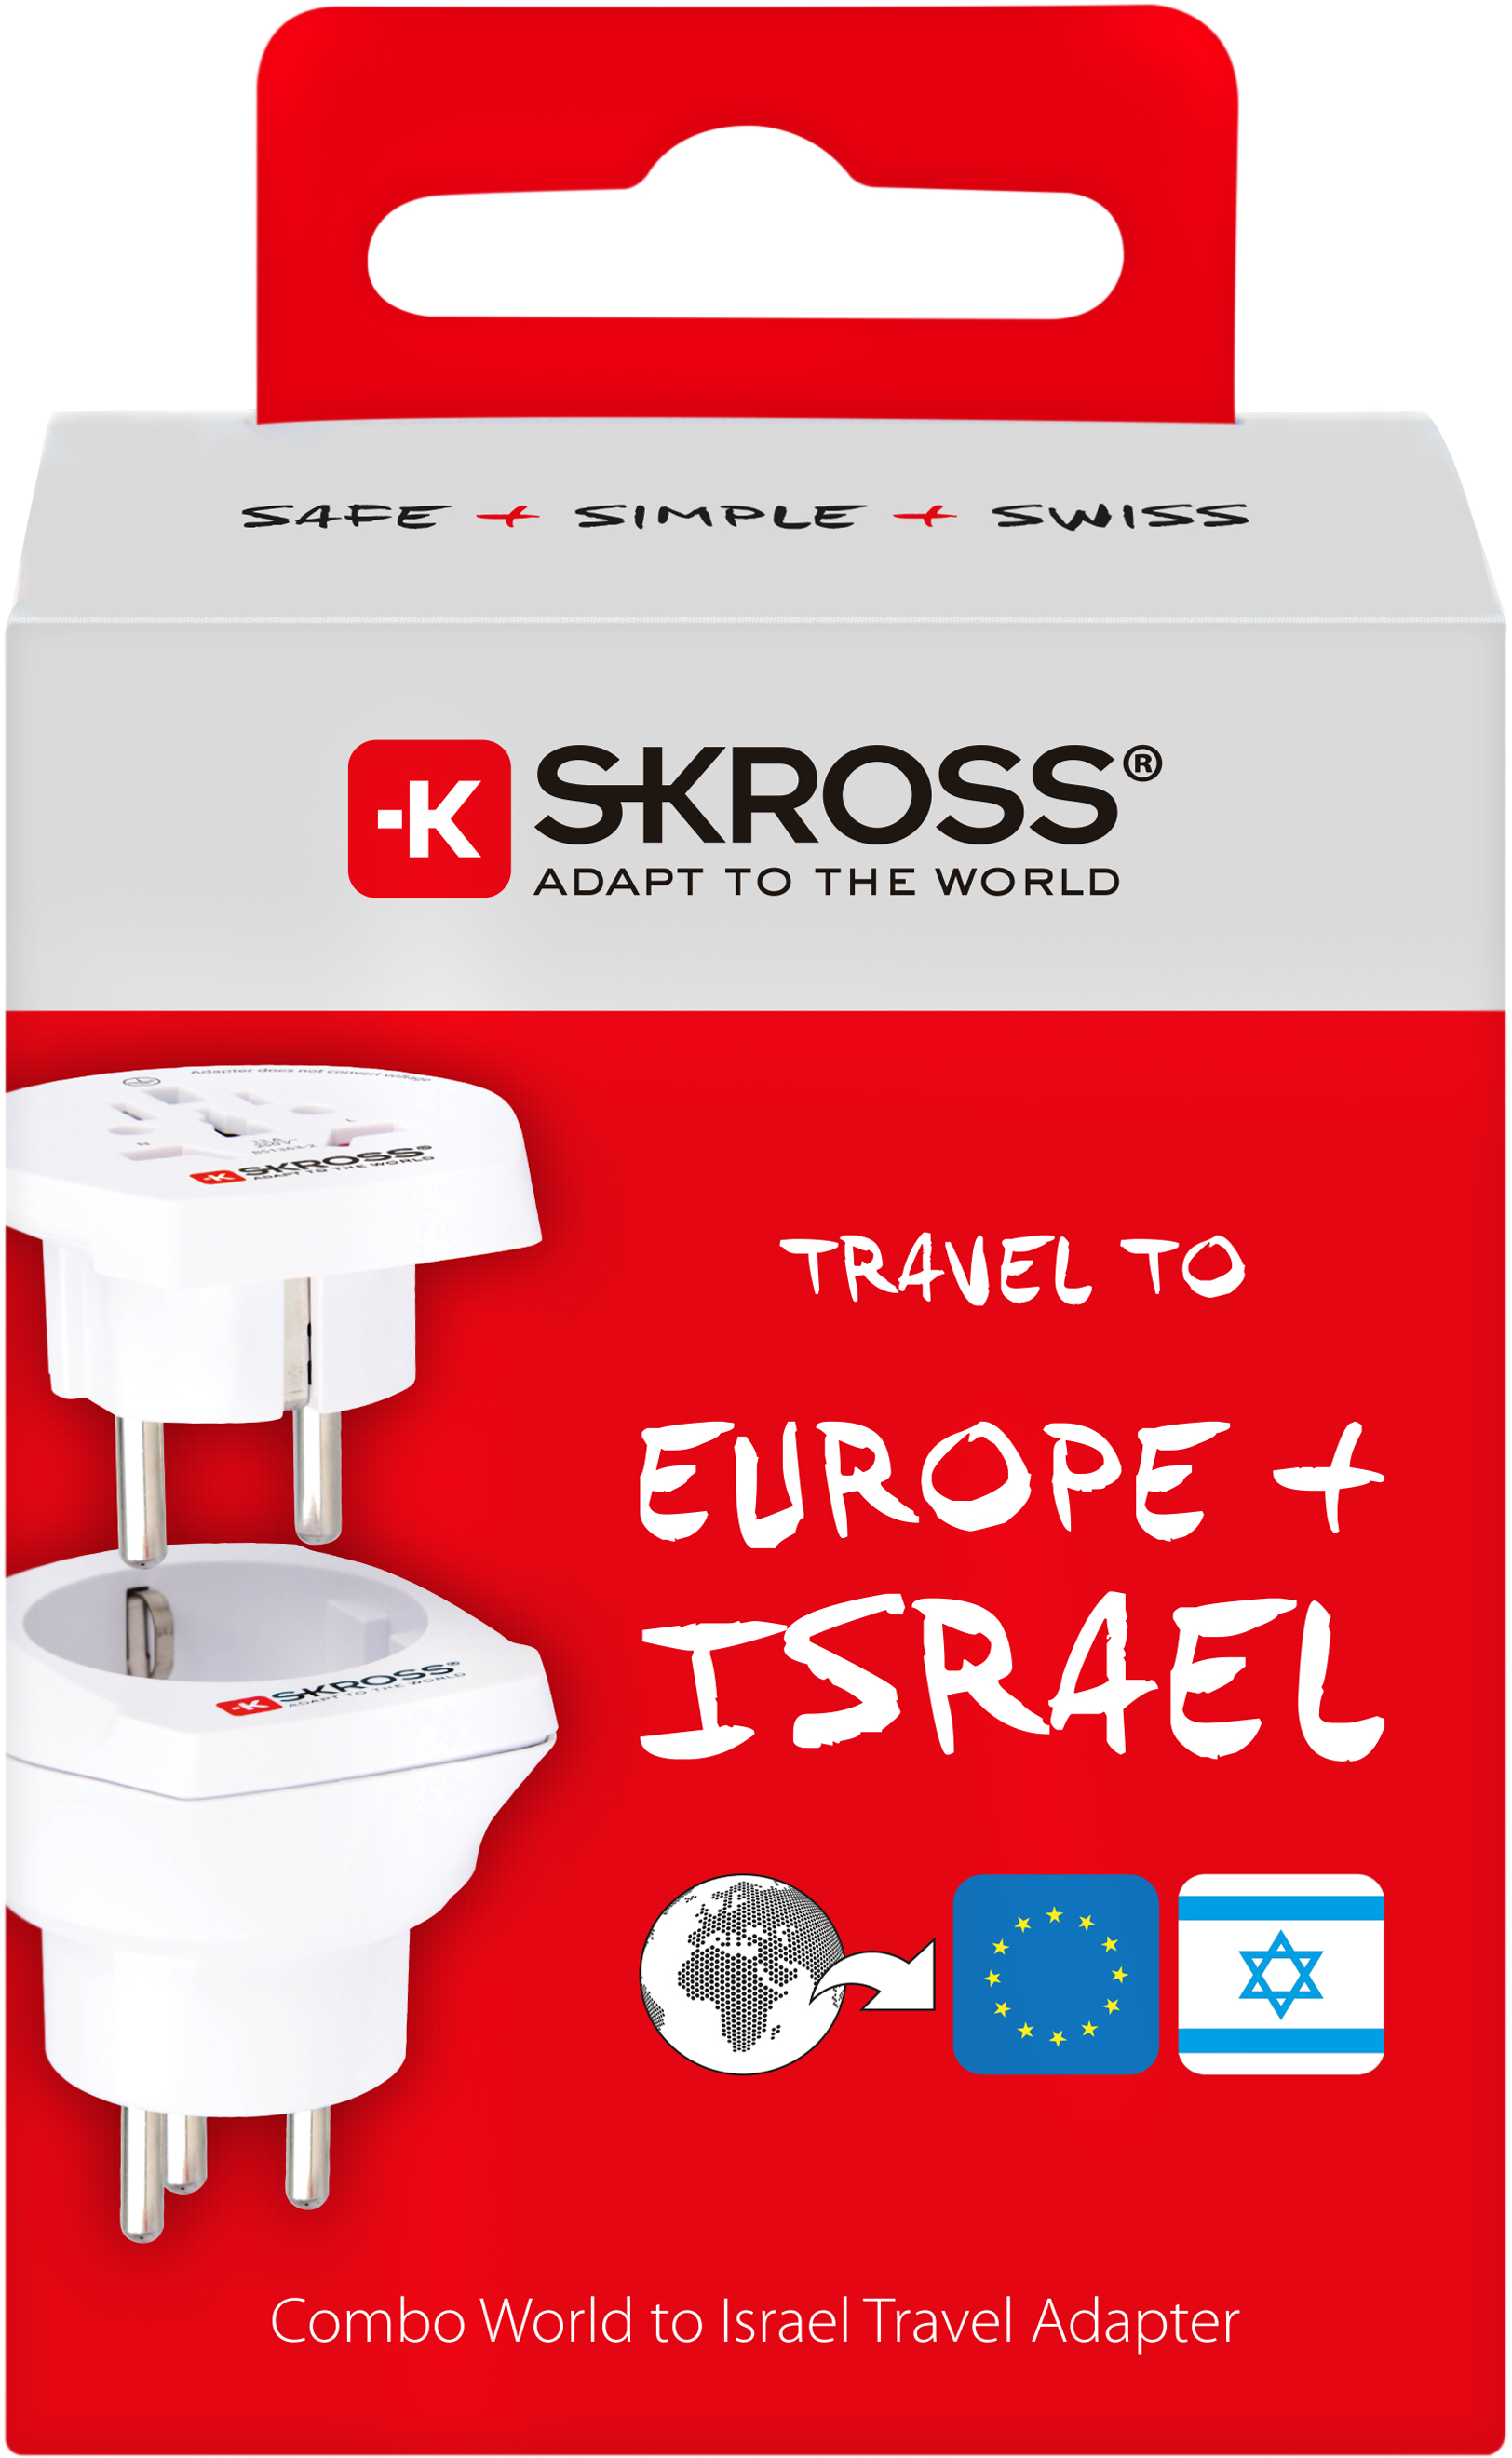 Skross 3-Pole Combo World to Israel Travel Adapter Packaging